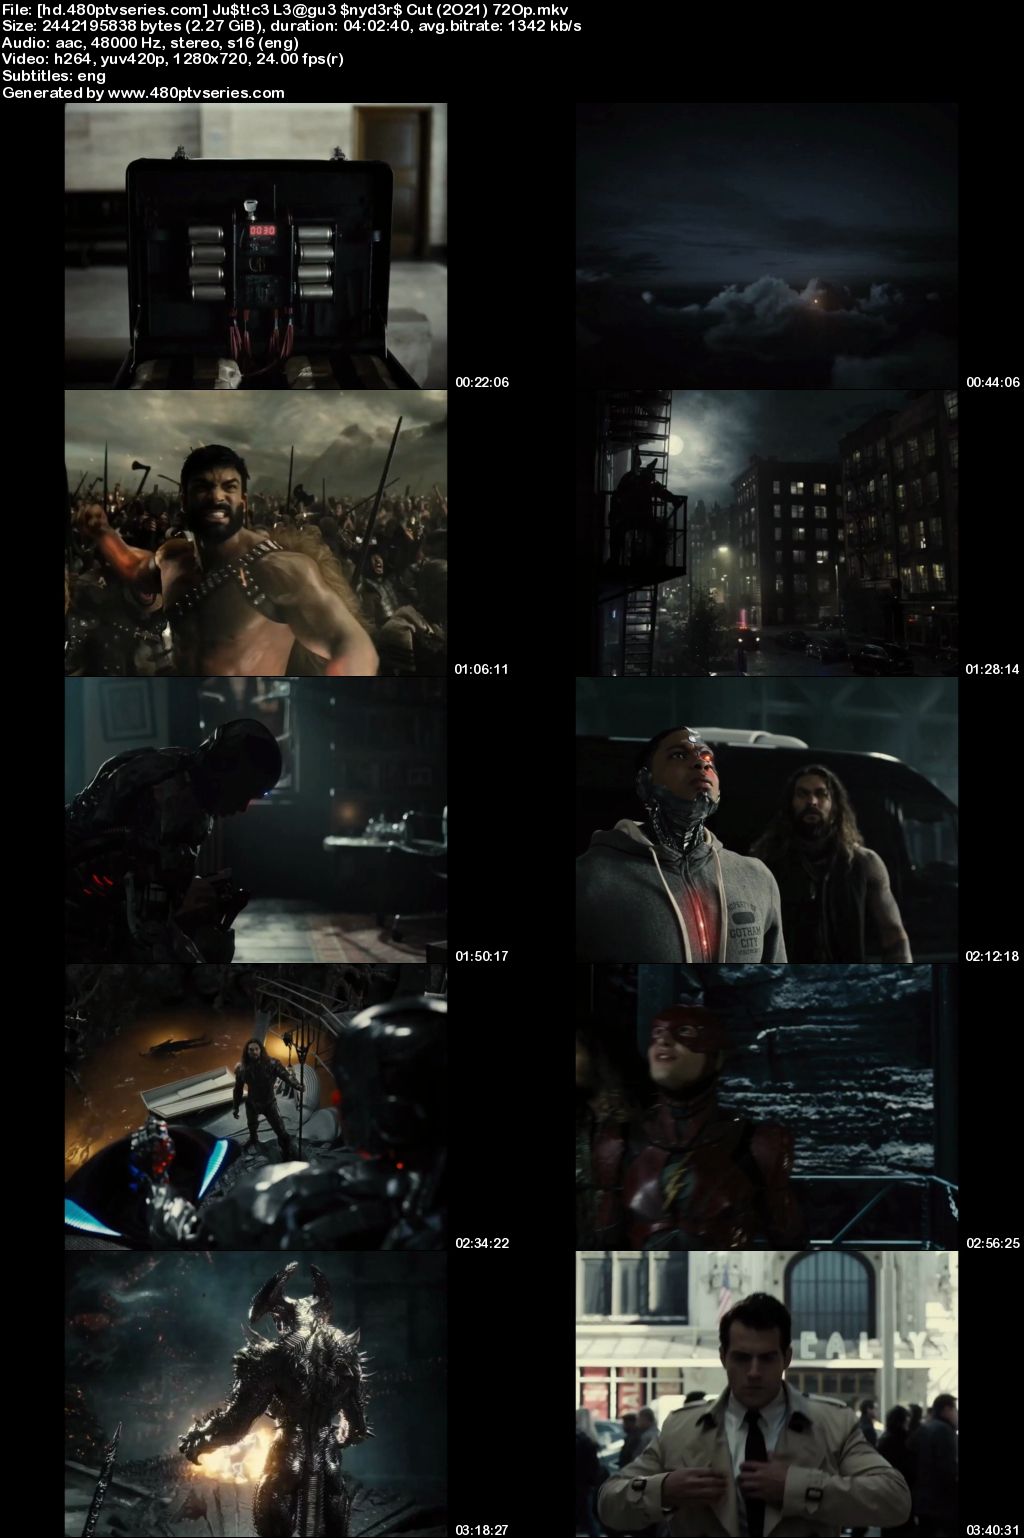 Watch Online Free Zack Snyder’s Justice League (2021) Full English Movie Download 480p 720p